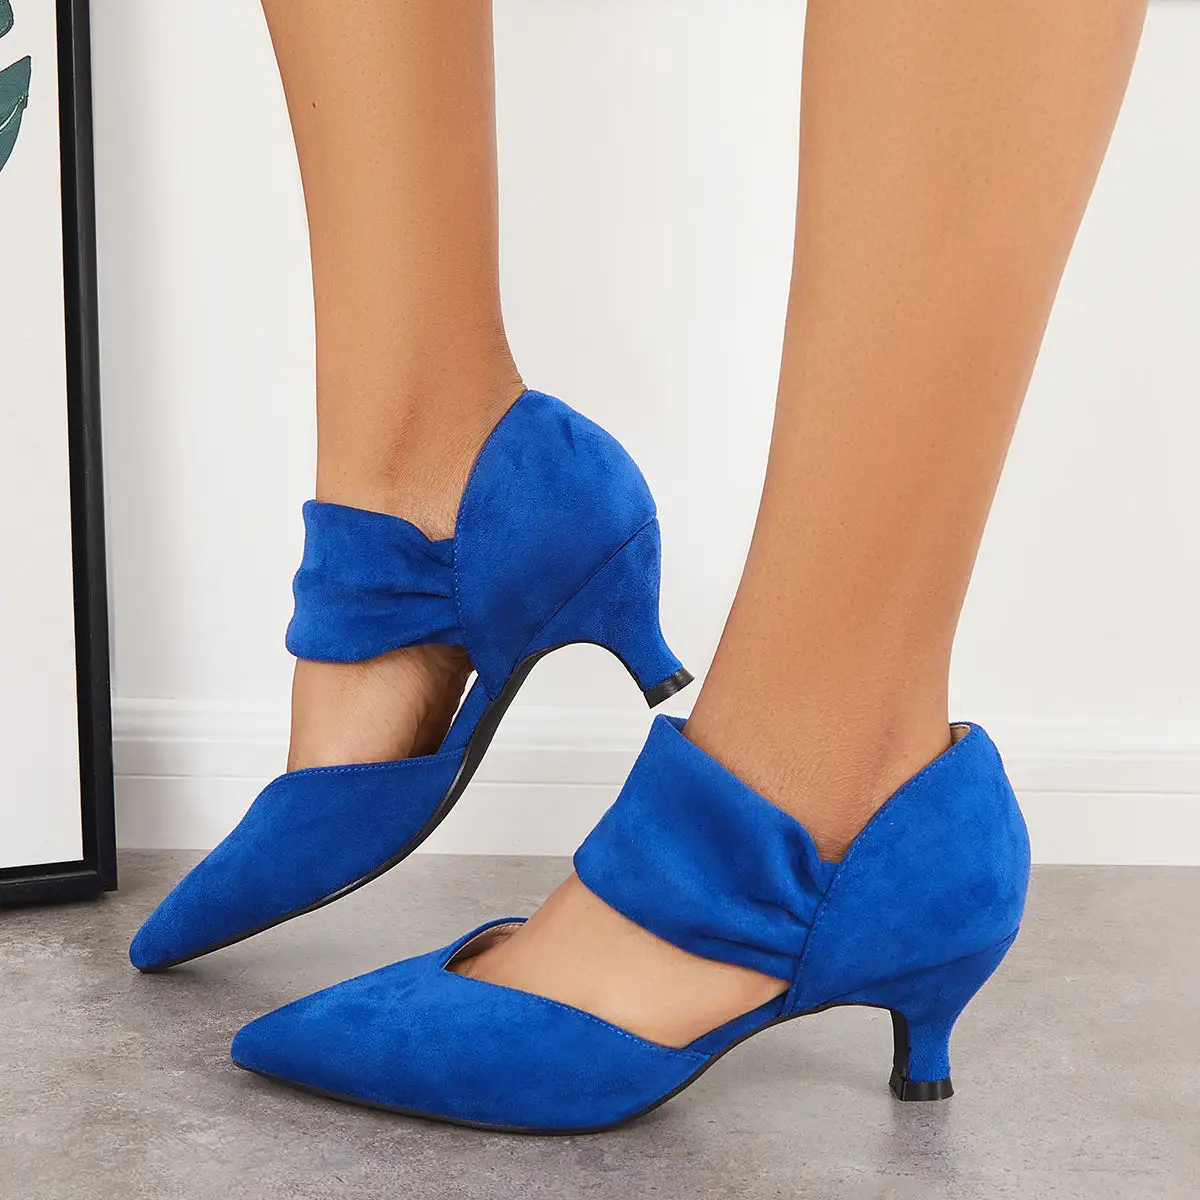 Pointed Toe Kitten Heel Pumps Slip on Instep Straps Office Shoes